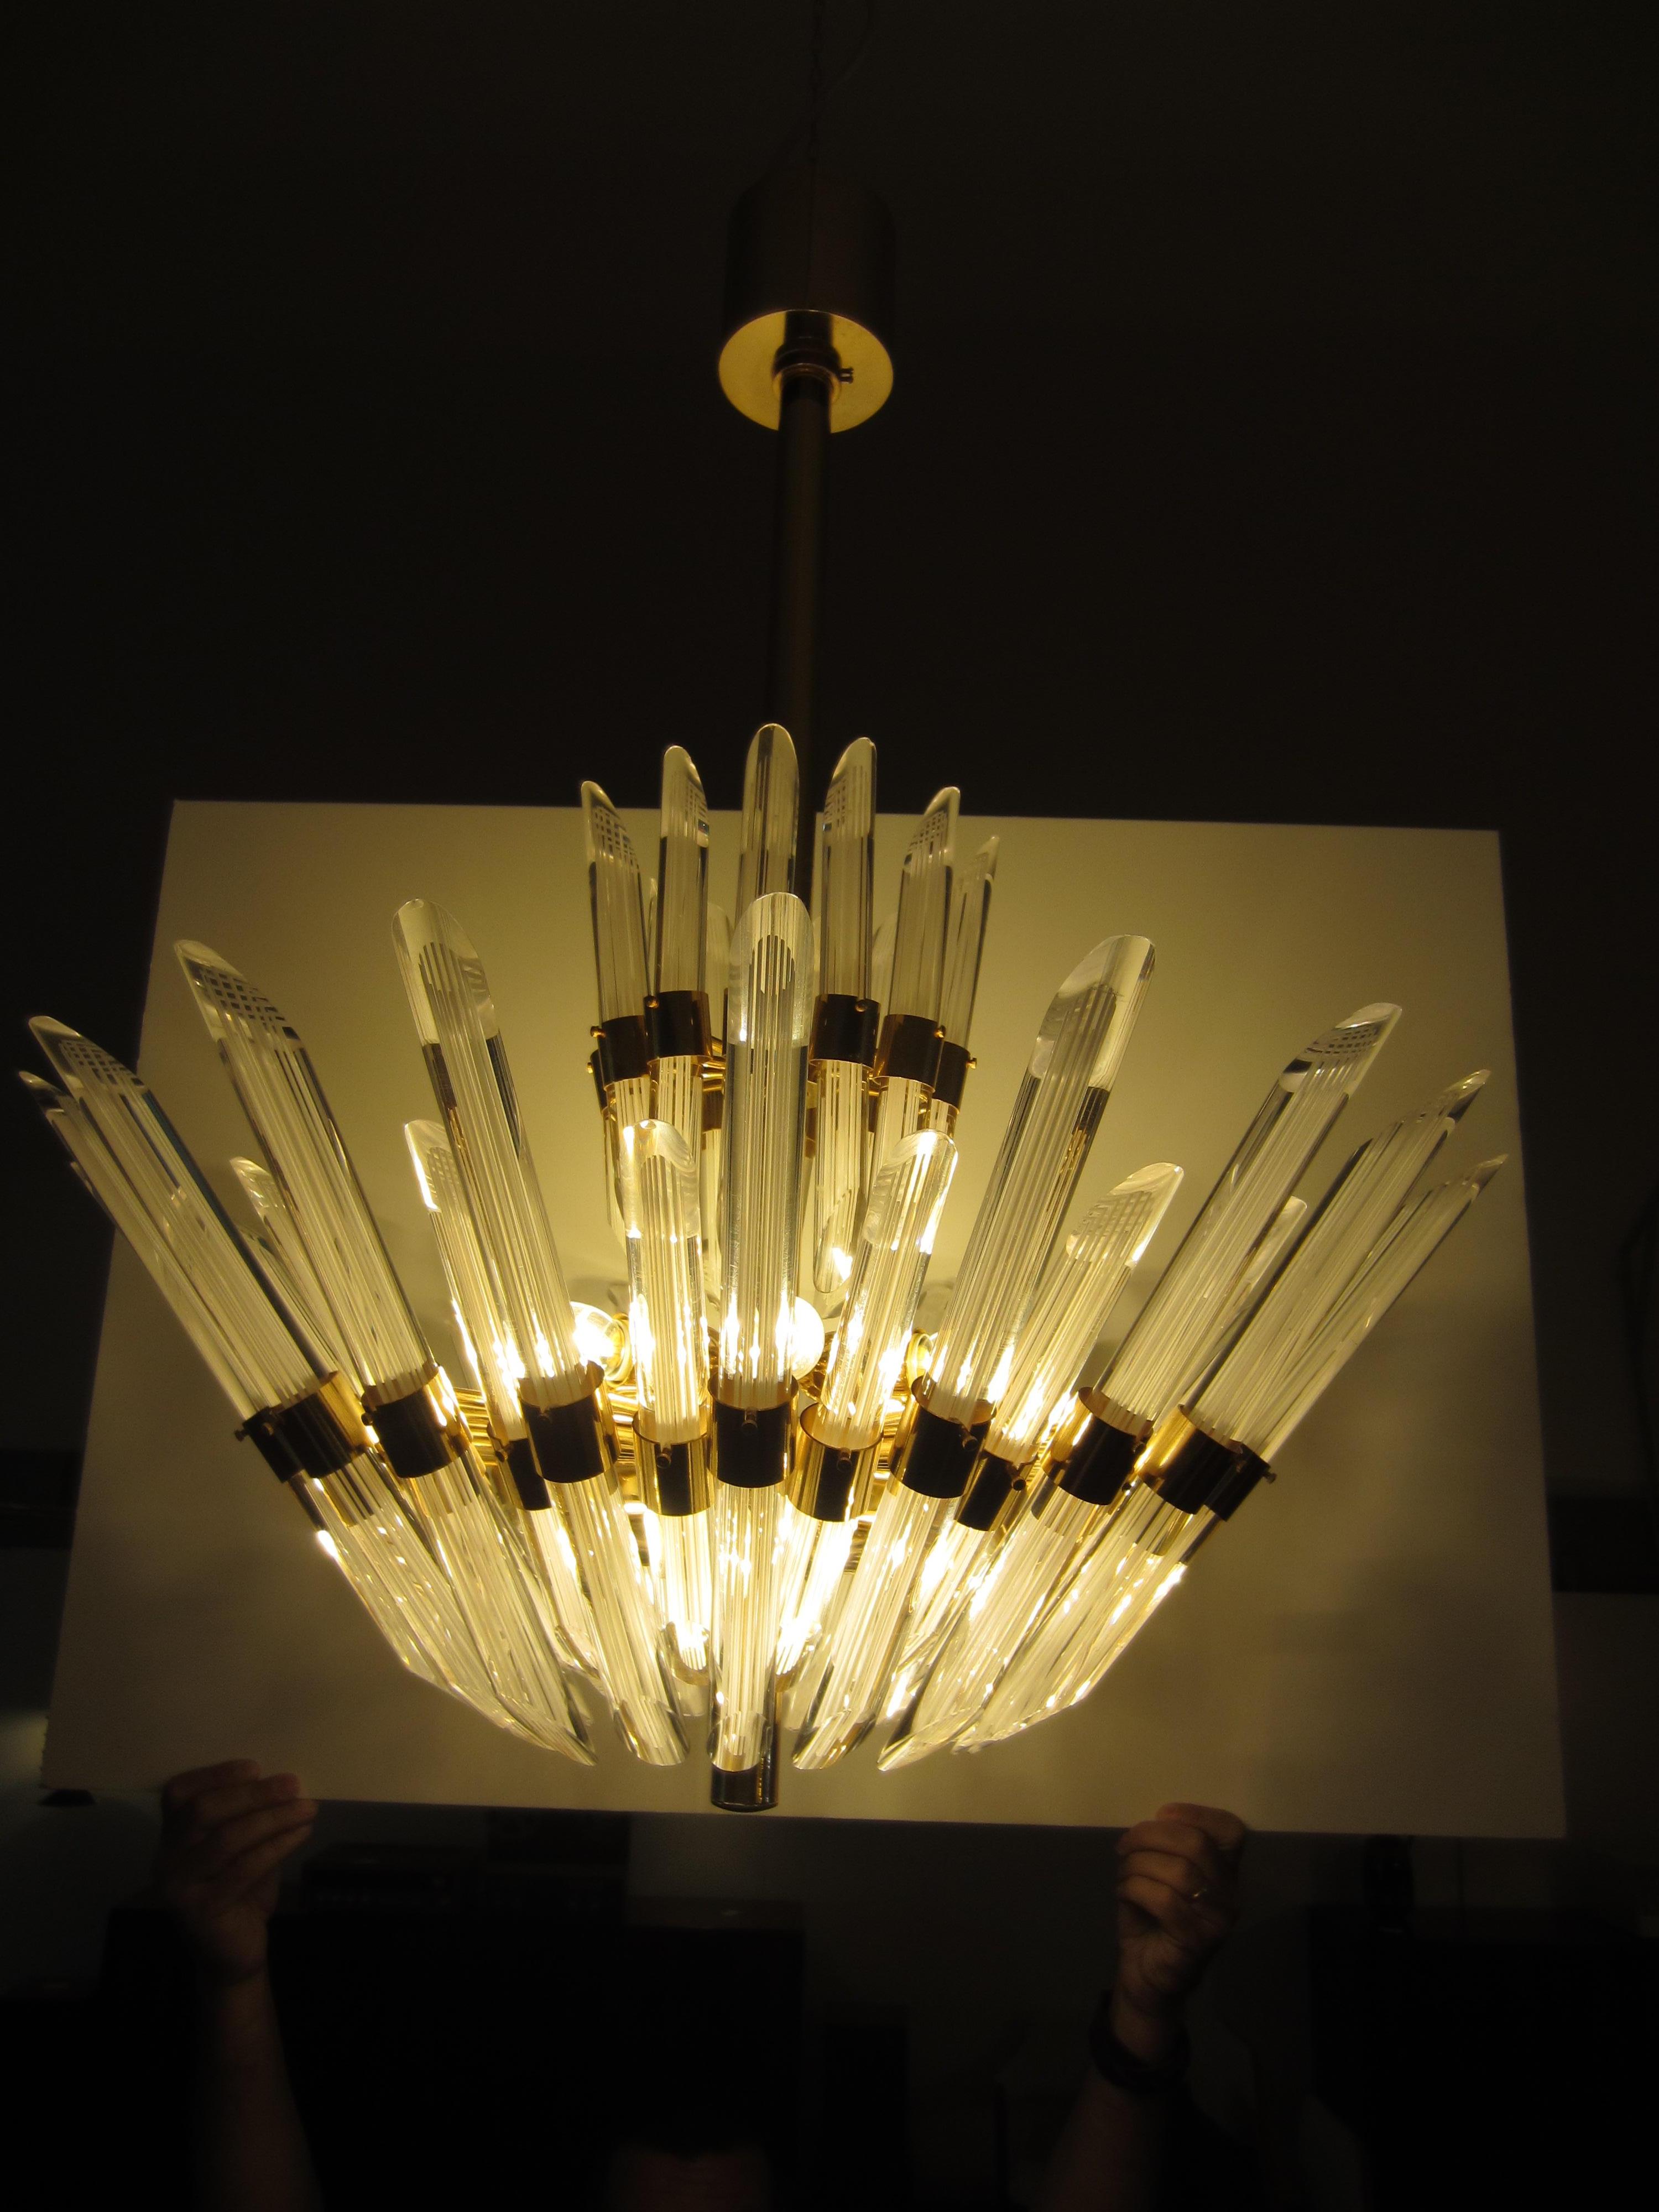 Metal and Murano glass chandelier from the 1980s in gilt metal and pointed glass rods, including replacement glass pieces, easy to dismantle. 6 spare parts available.